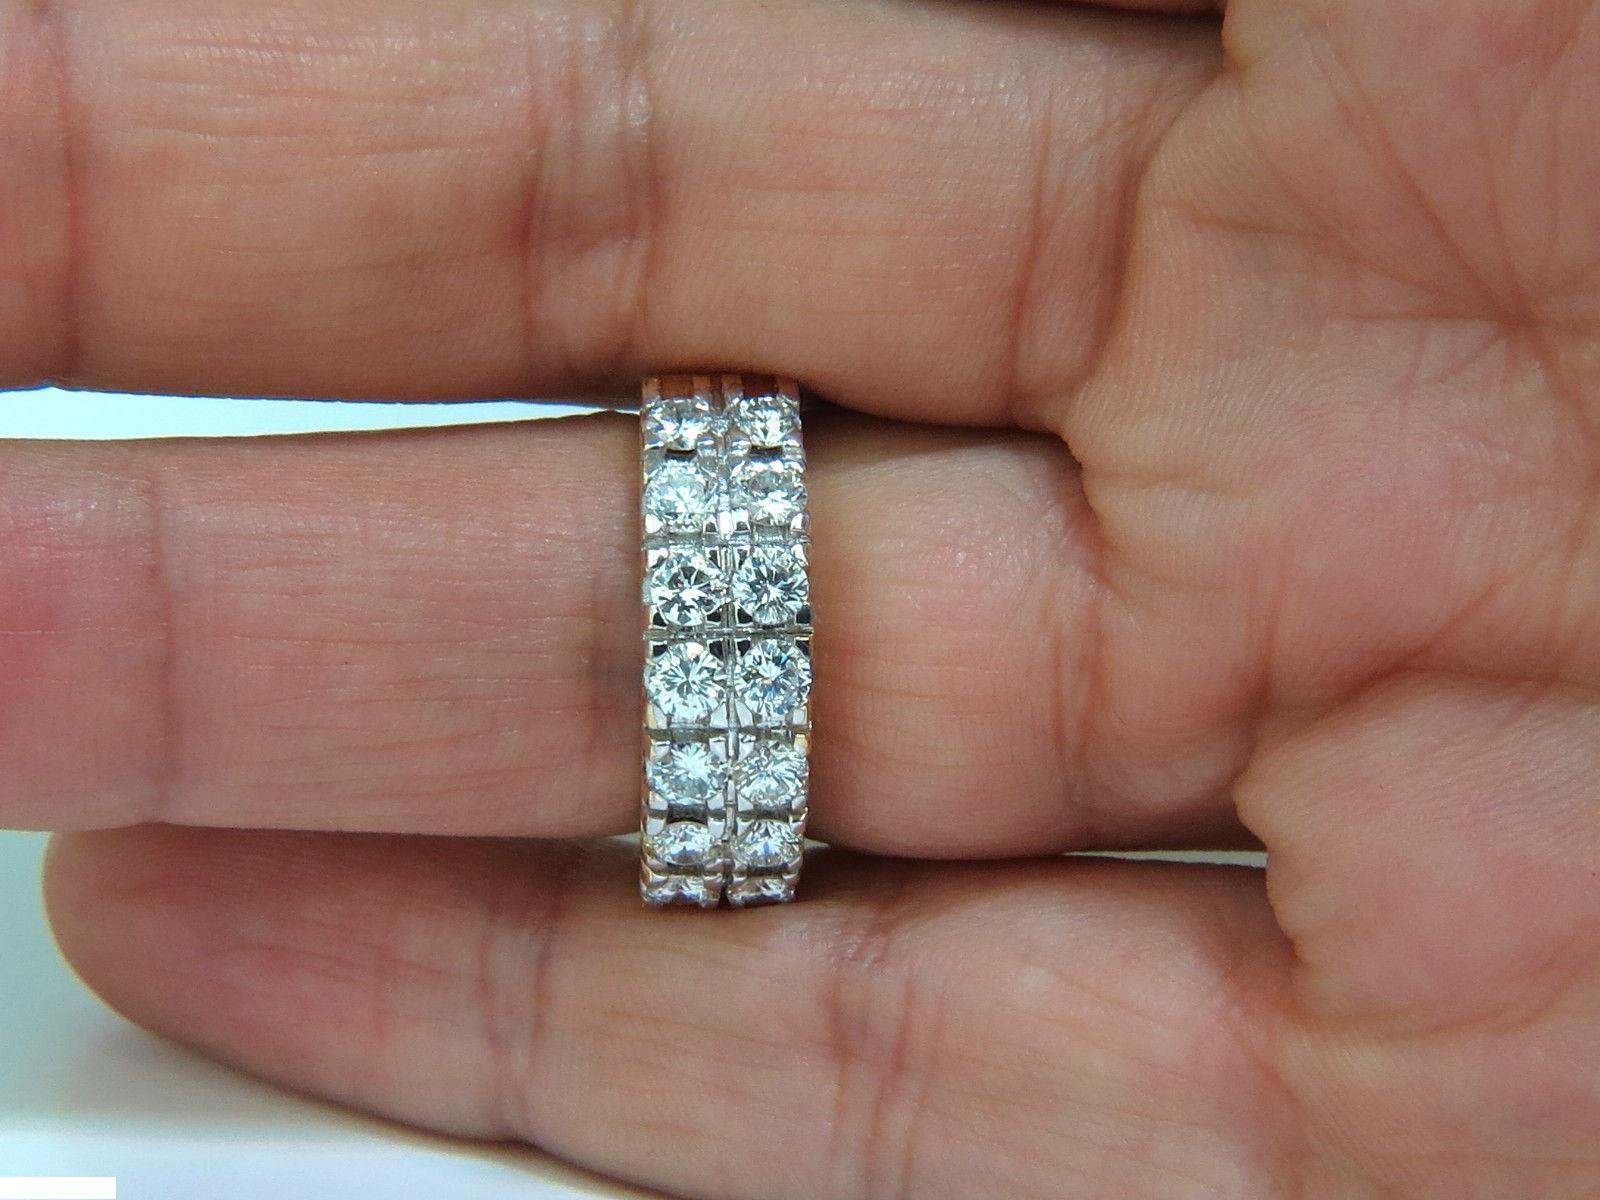 Classic Diamond band

2.00ct diamonds

Full cut Rounds

H-color, Vs-2 clarity

14kt. yellow gold

 8.8 grams

7.40mm wide

 size: 8 3/4

can resize, please inquire

$7000 appraisal will accompany